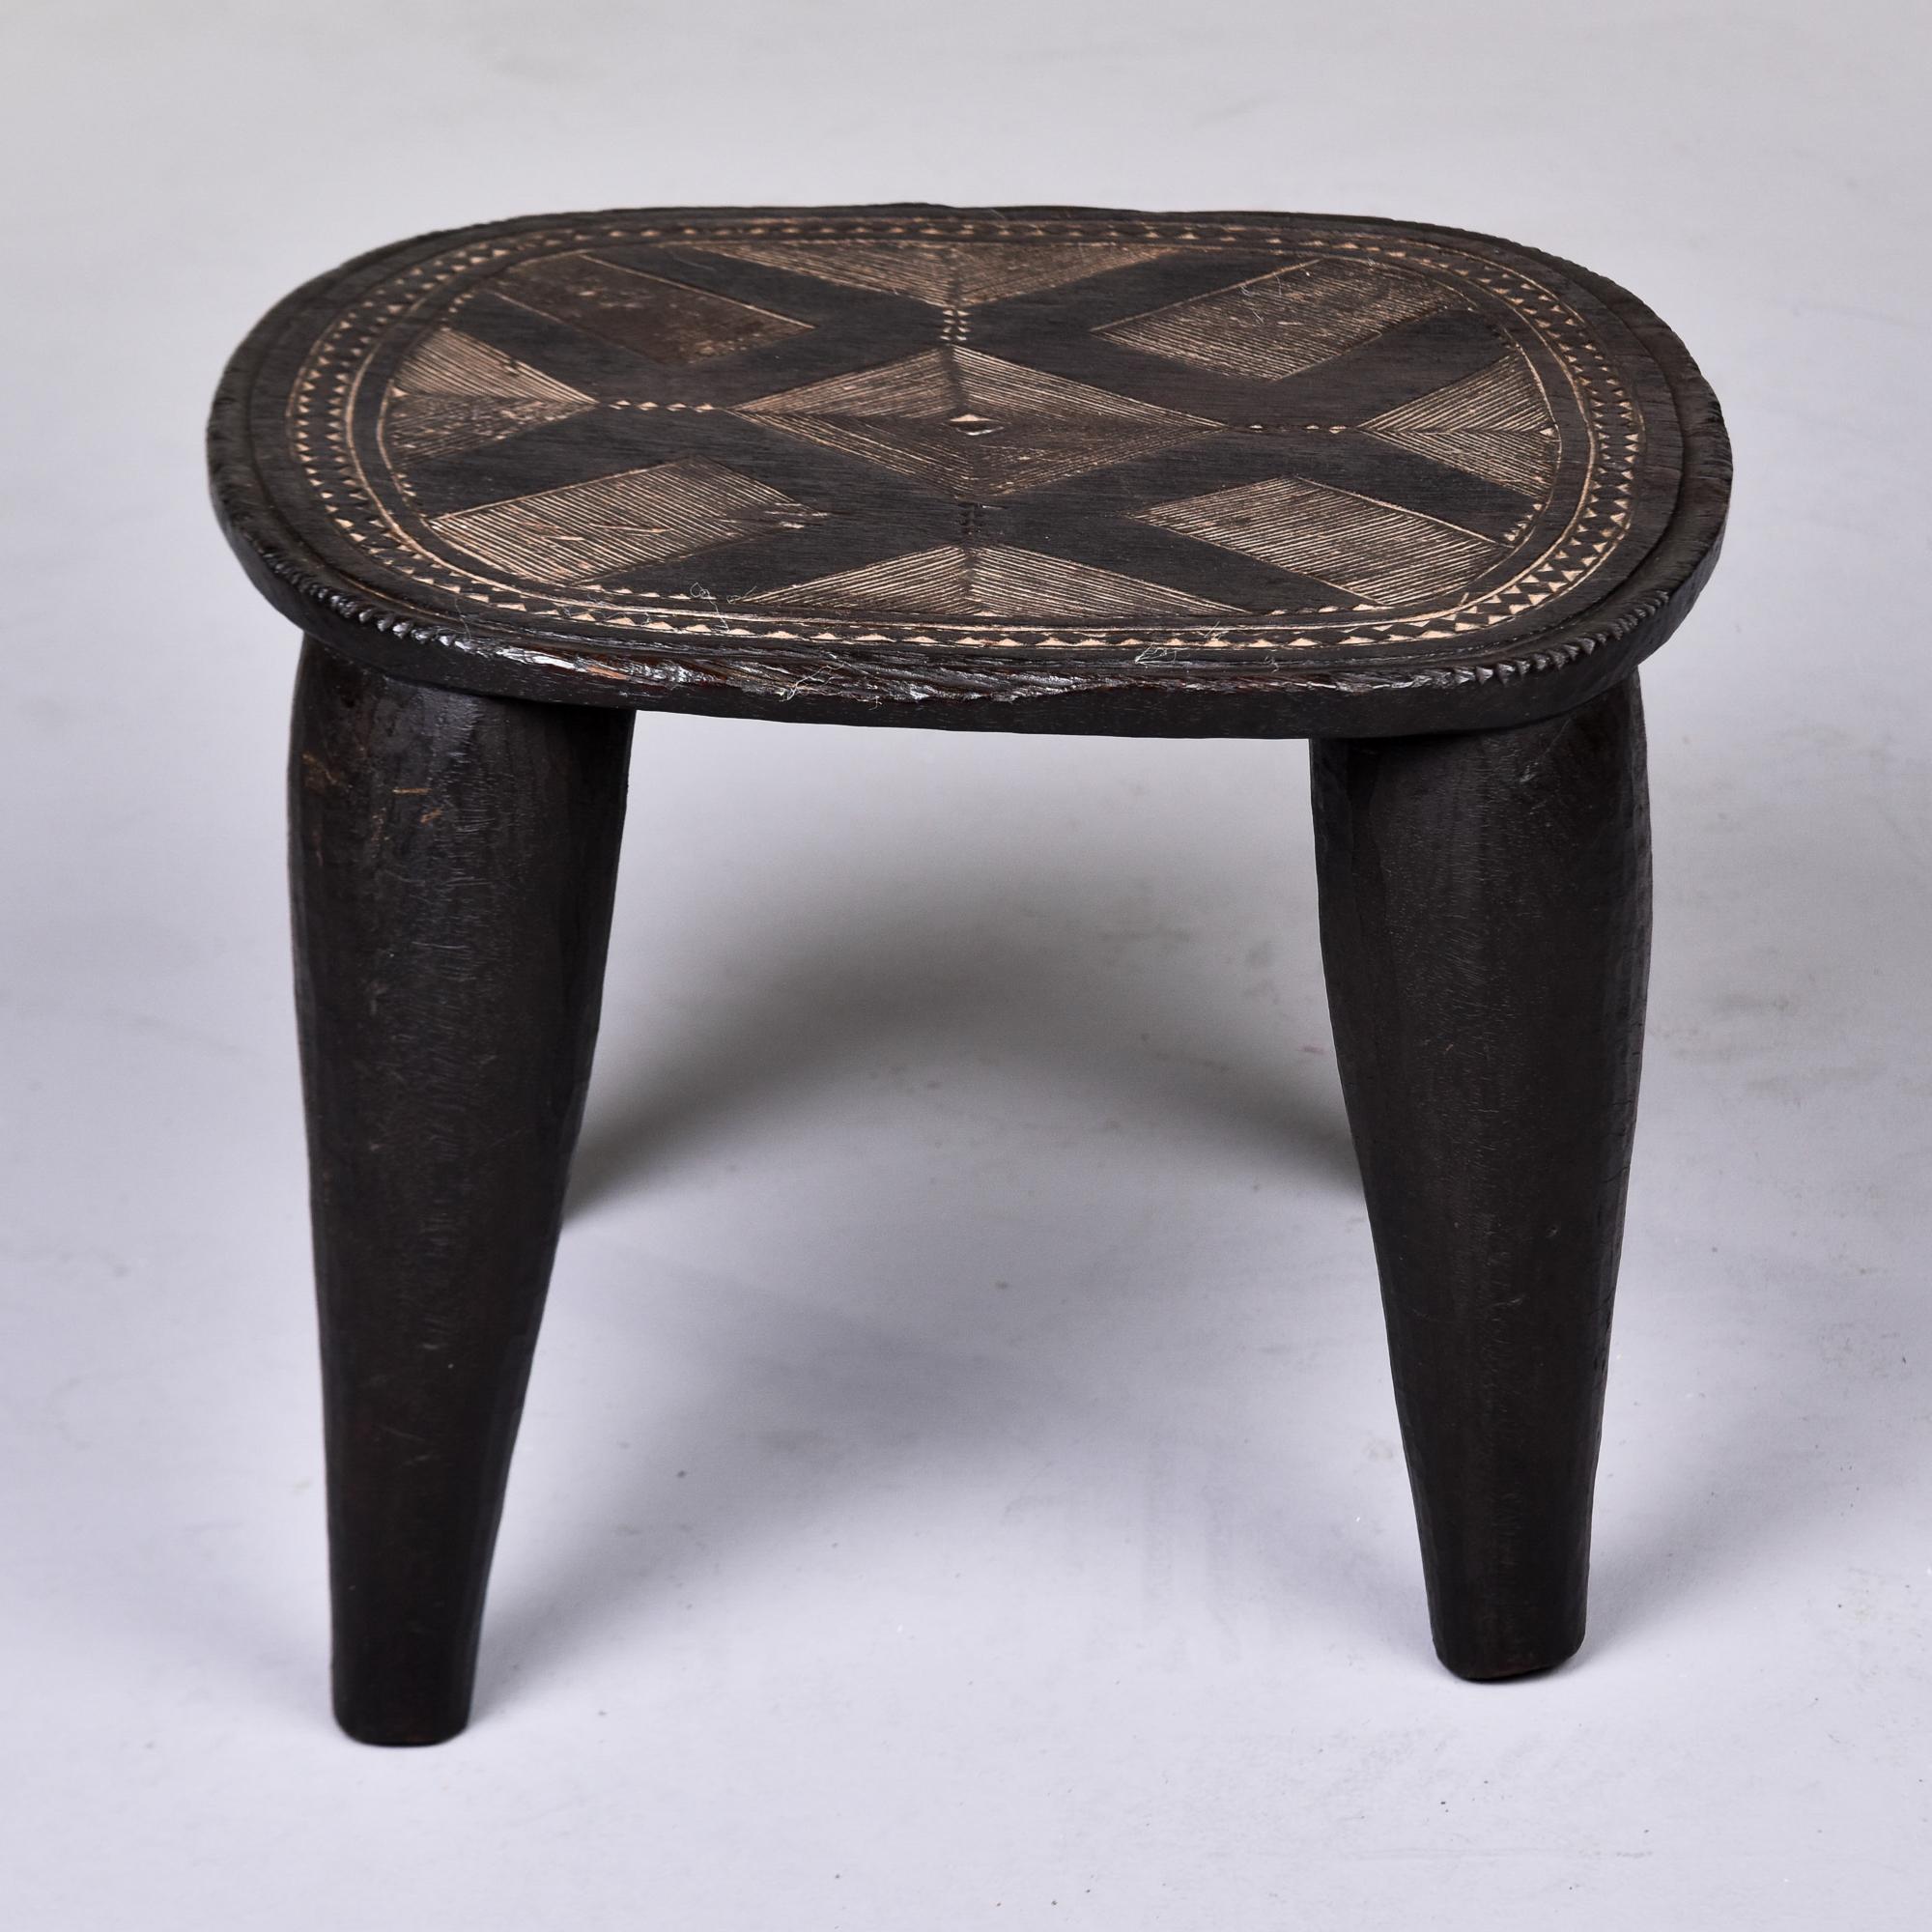 Hand-Carved Vintage Carved Small African Stool or Table by the Nupe of Nigeria 